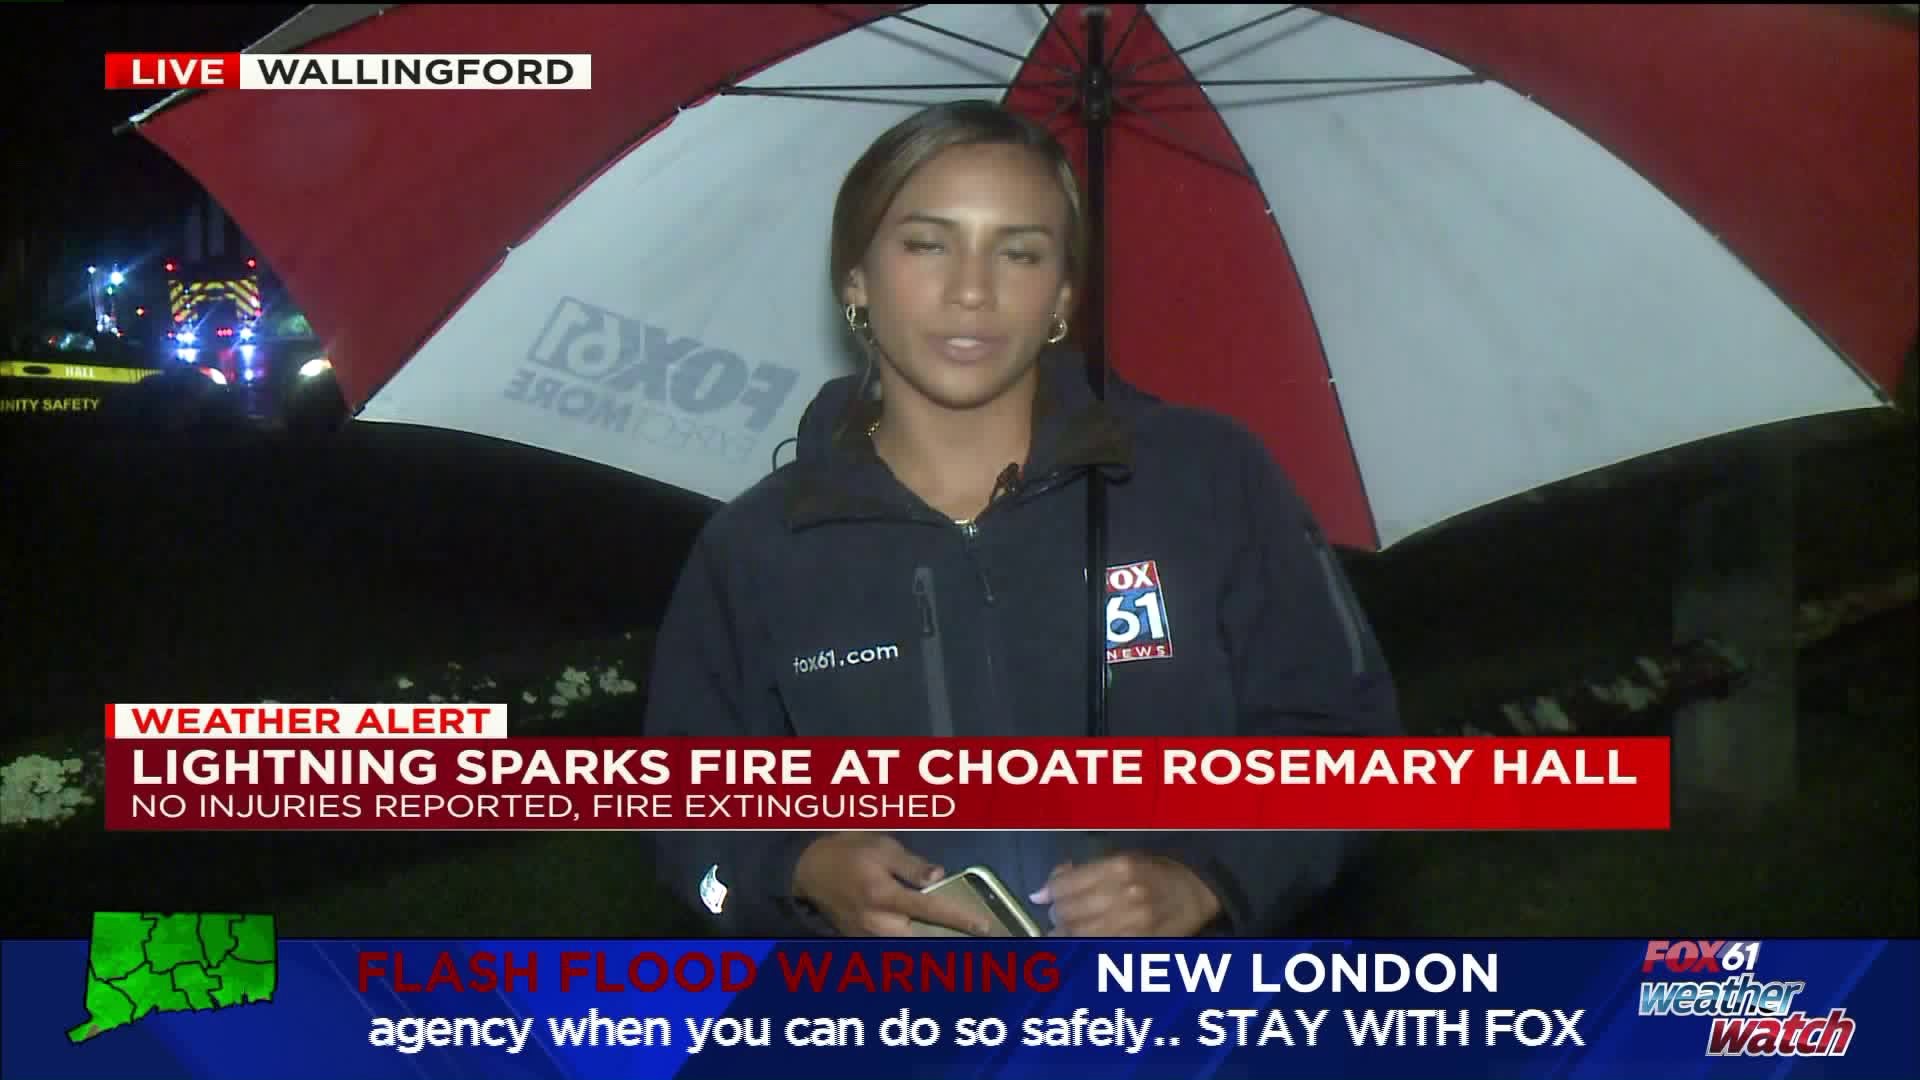 Lightning sparks fire at Choate Rosemary Hall